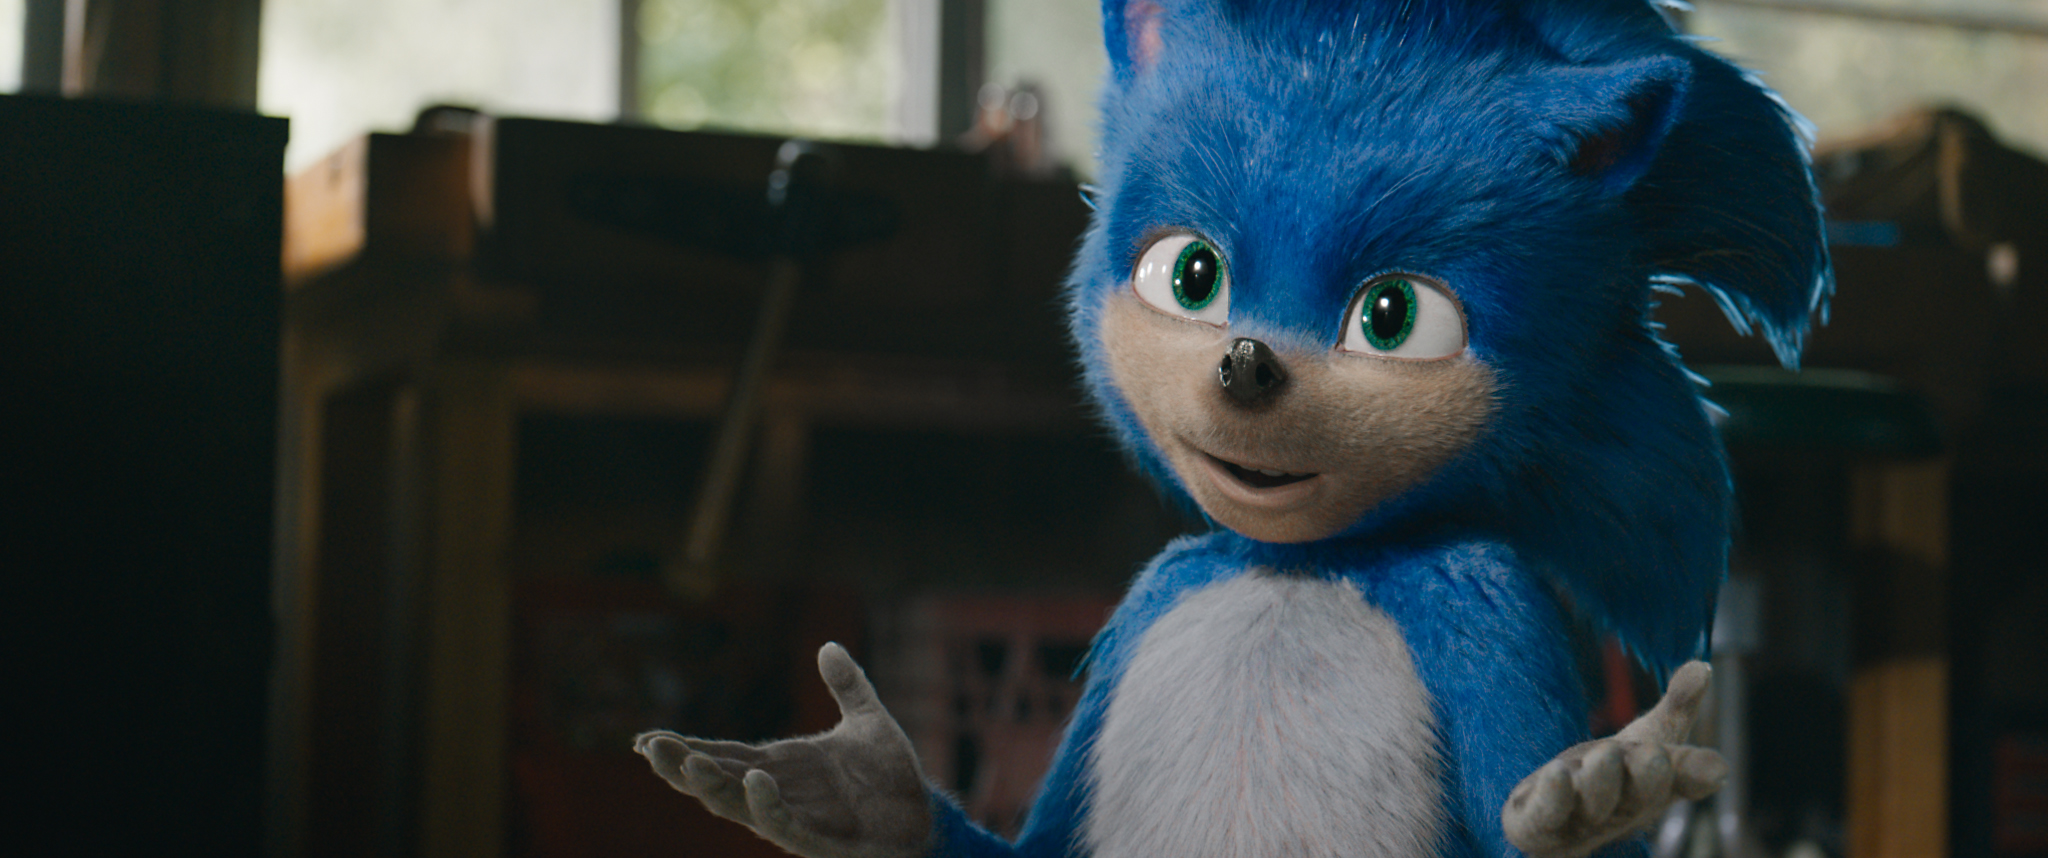 Sonic The Hedgehog Trailer Is HERE!